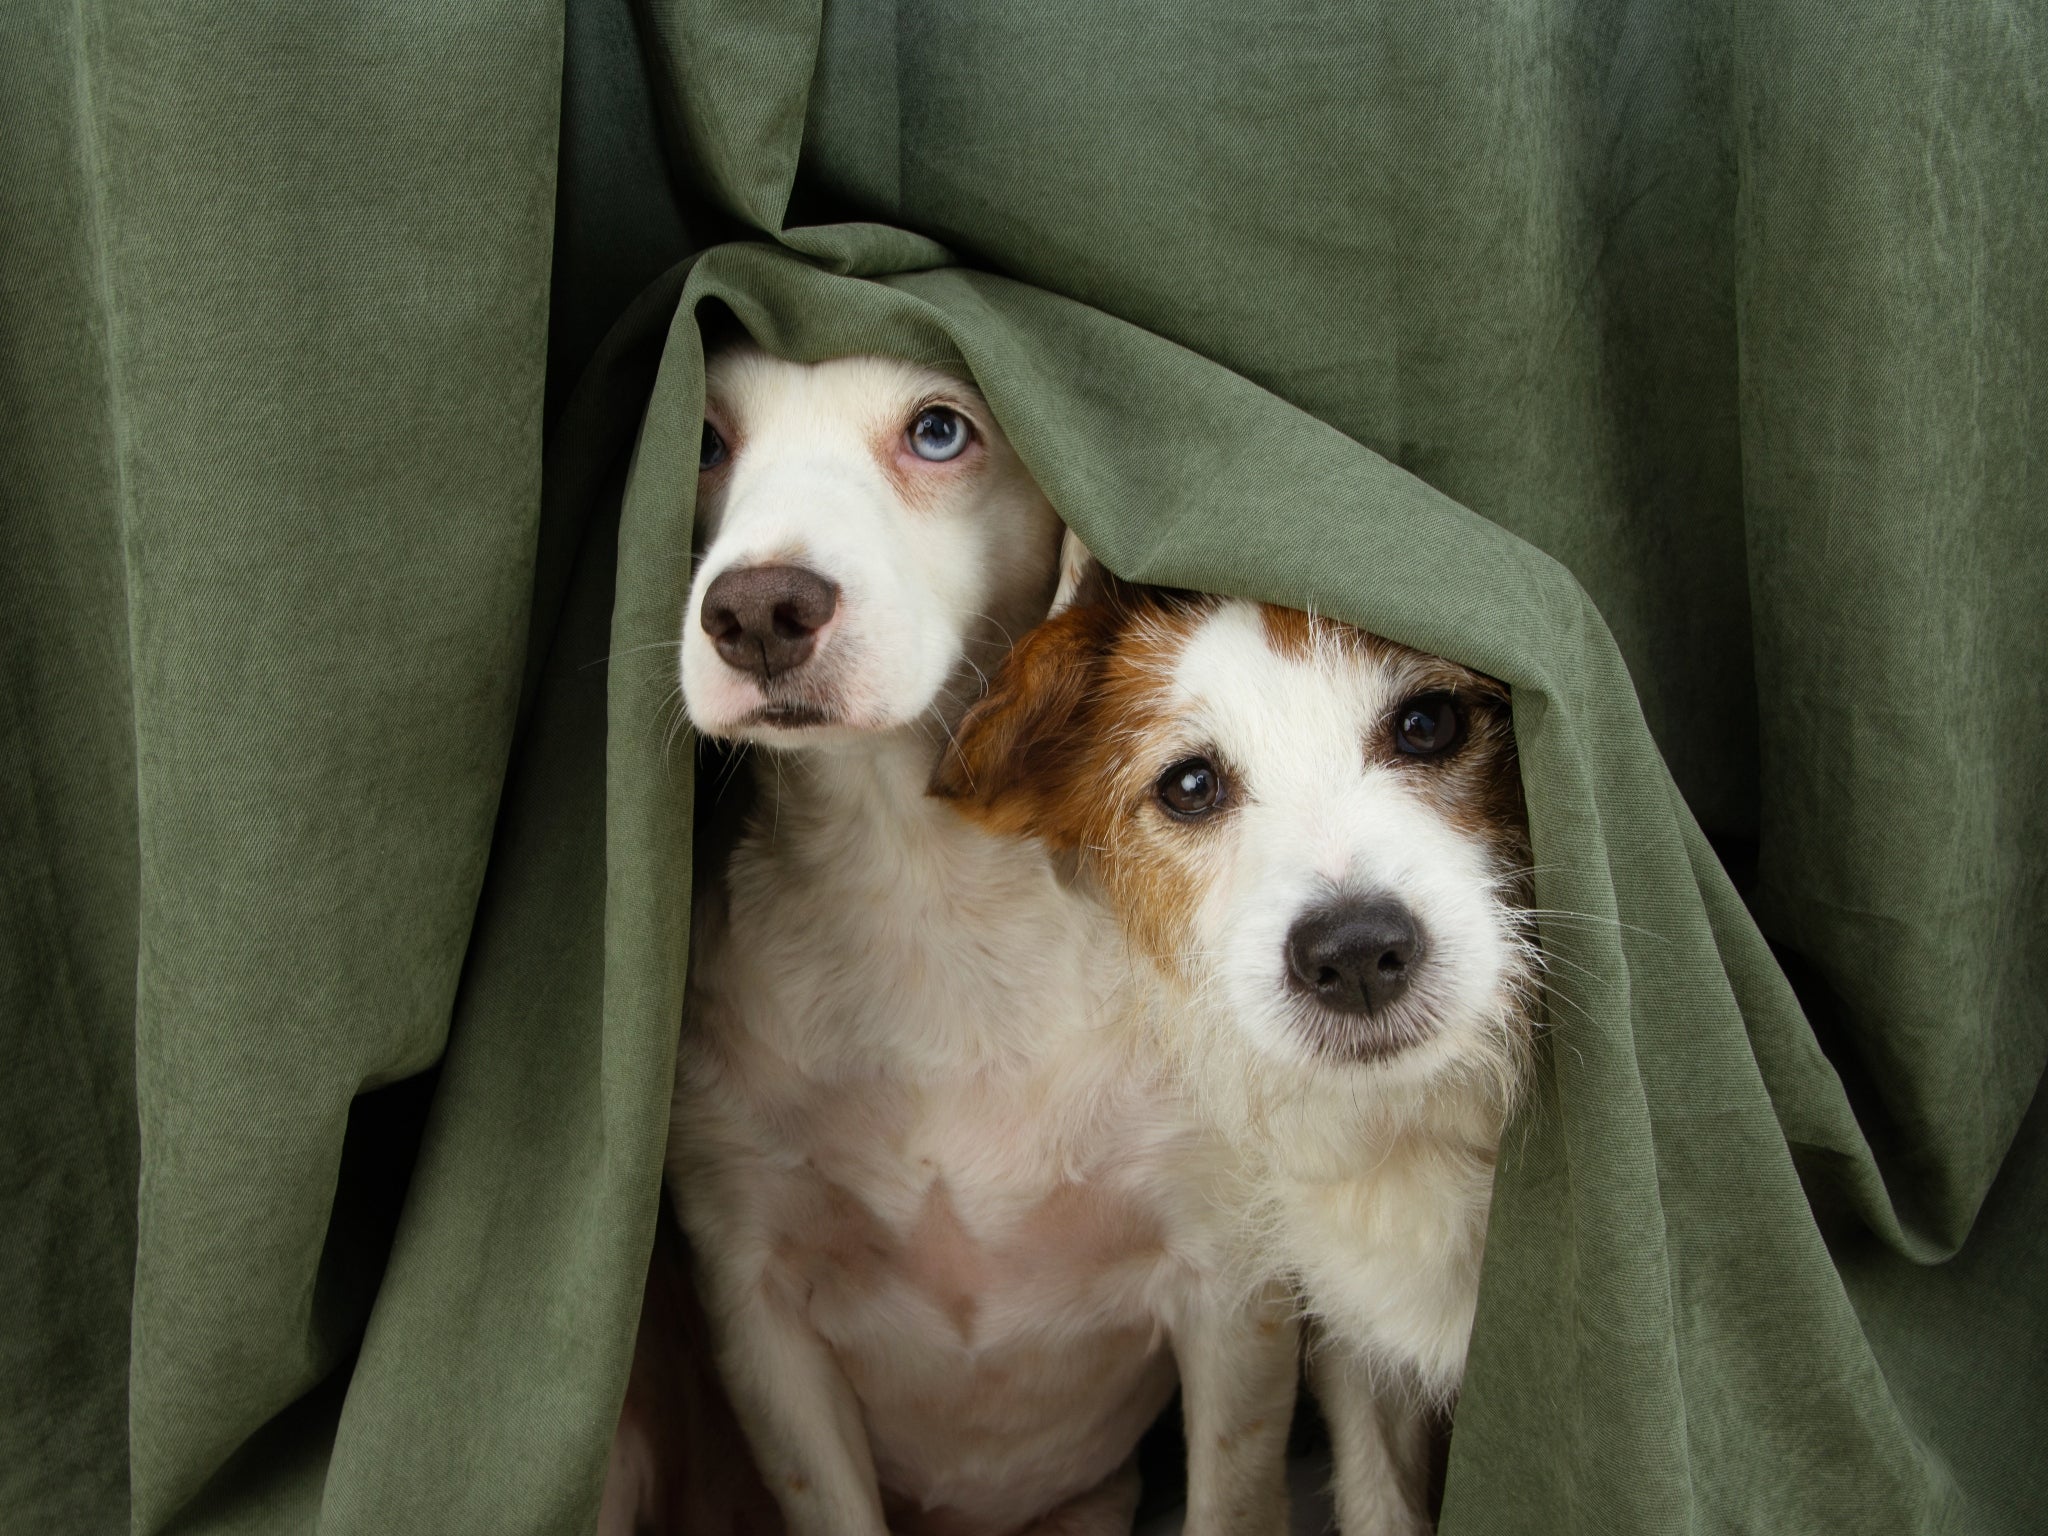 Building a den for your dog can create a safe space for them on Independence Day